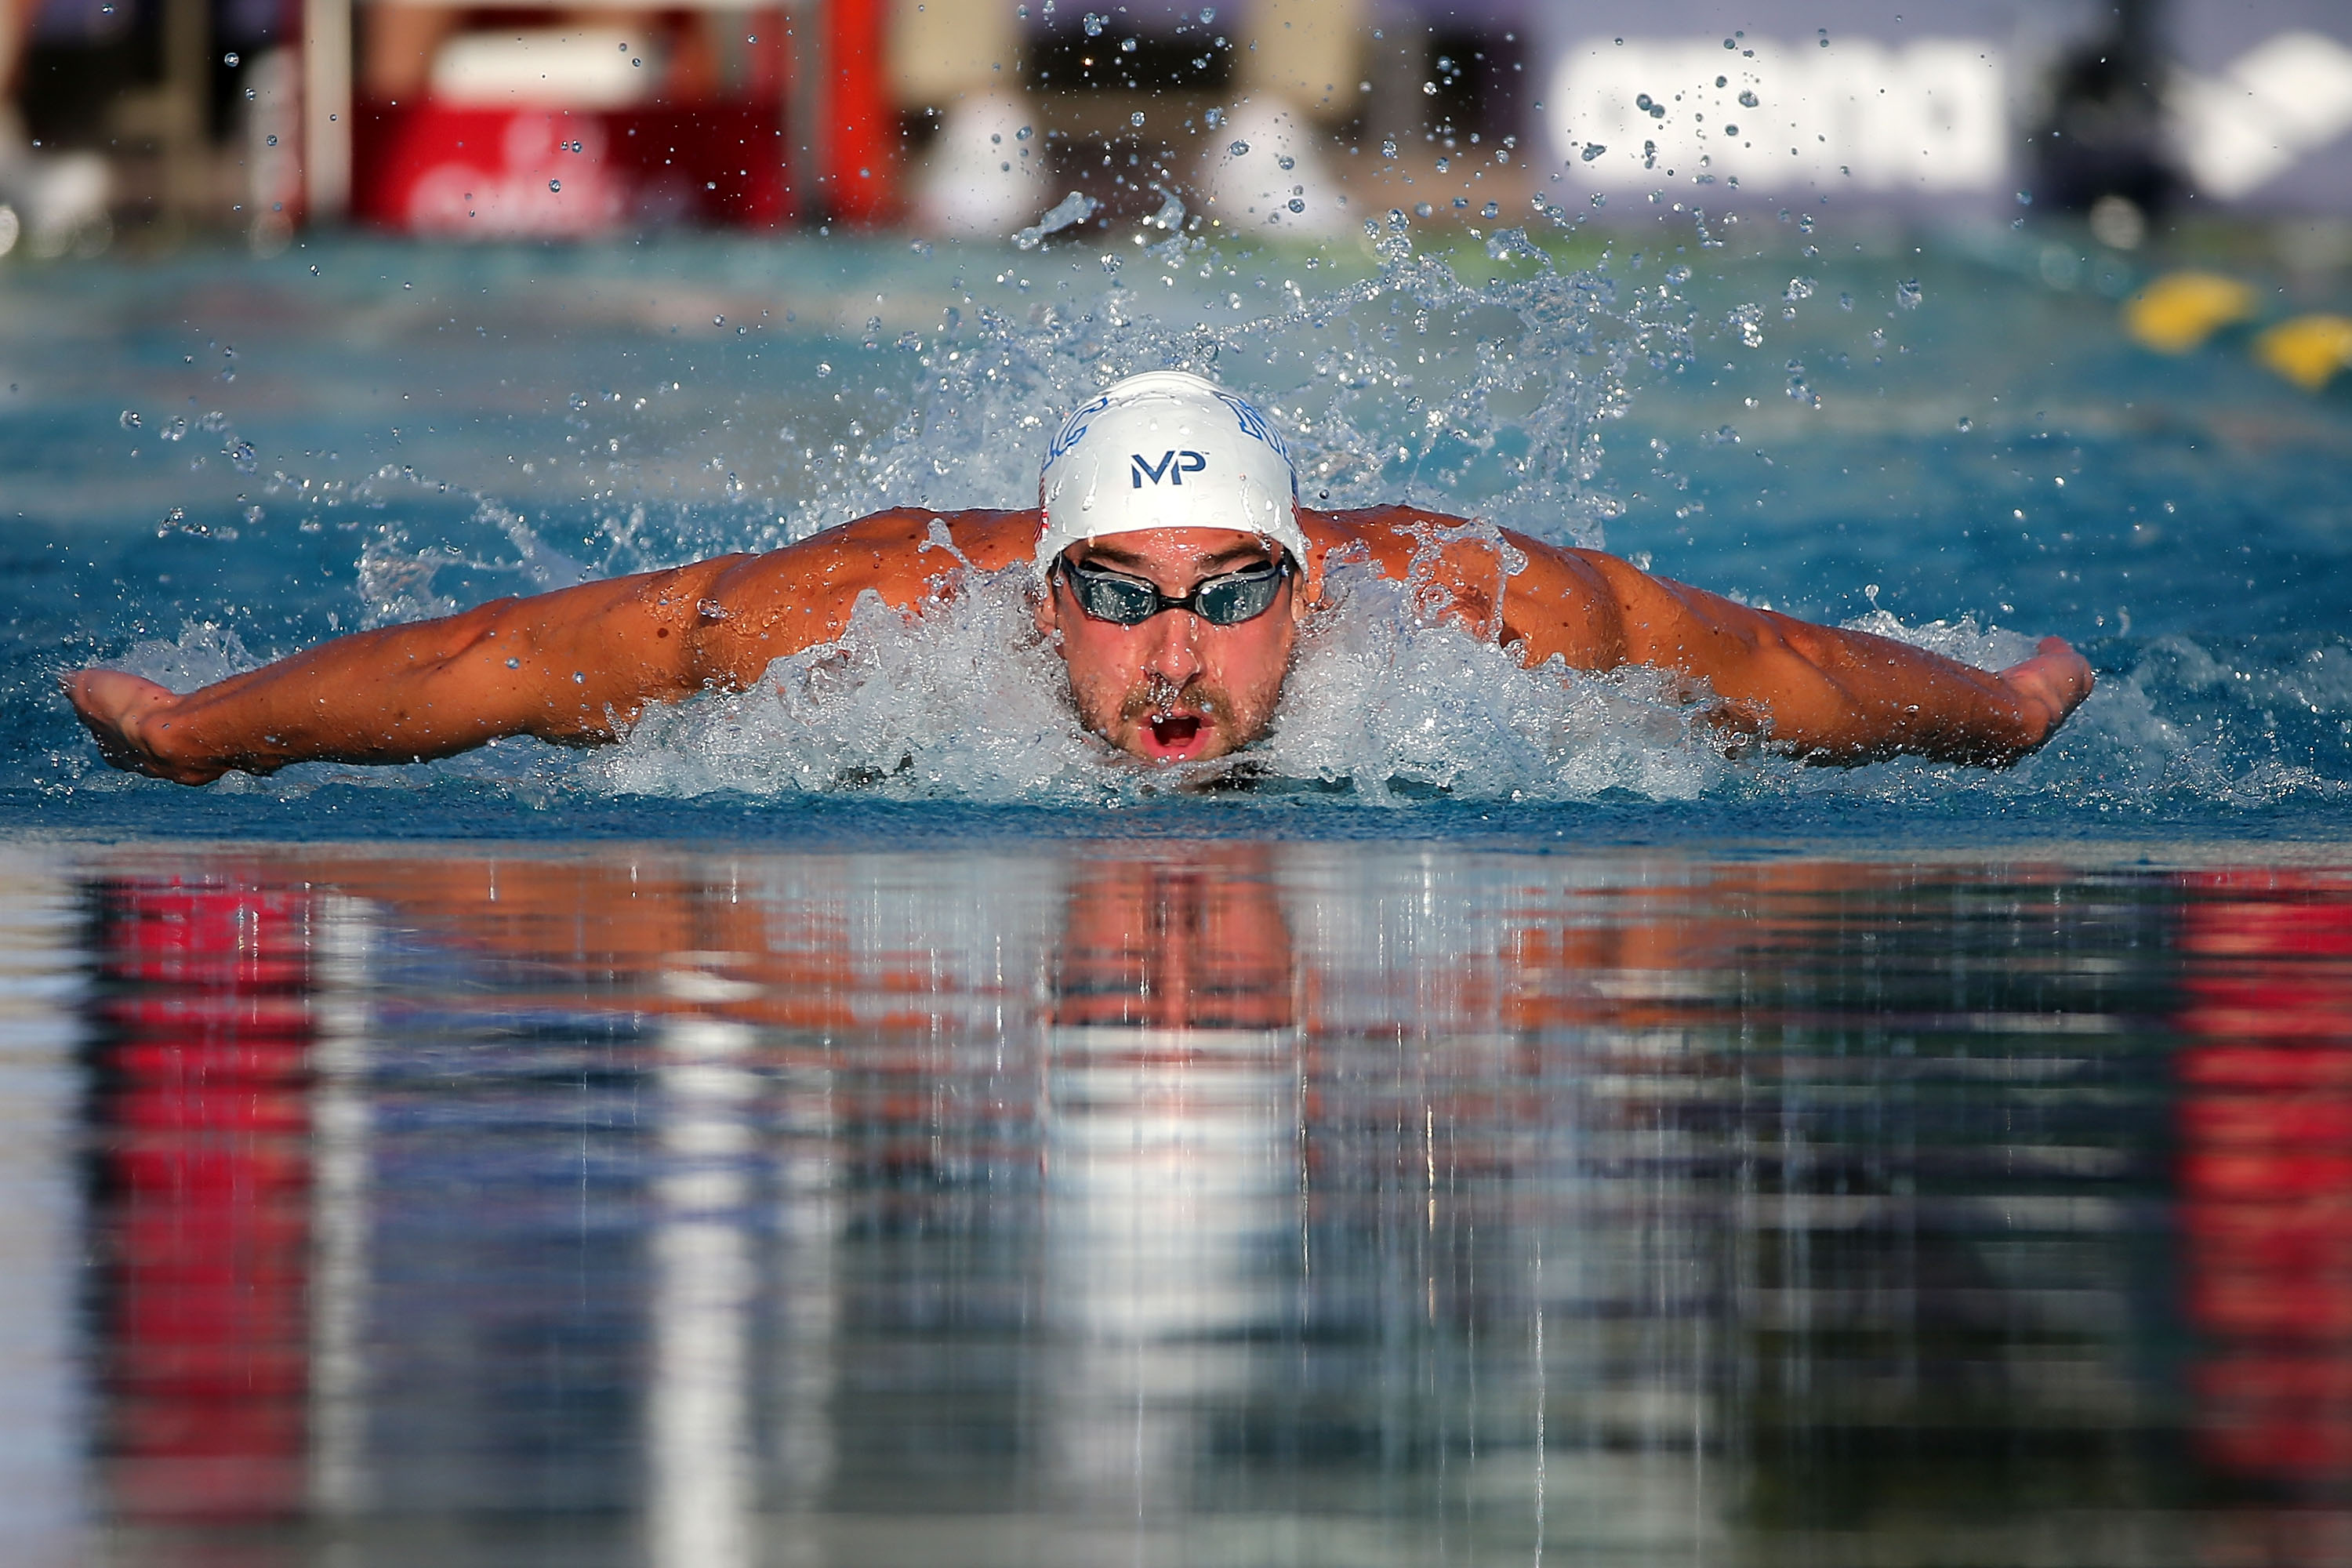 Michael Phelps competes in the finals of the men's 200 meter individual medley at the Skyline Aquatic Center on April 16, 2016 in Mesa, Arizona.  Chris Coduto—Getty Images (Chris Coduto—Getty Images)